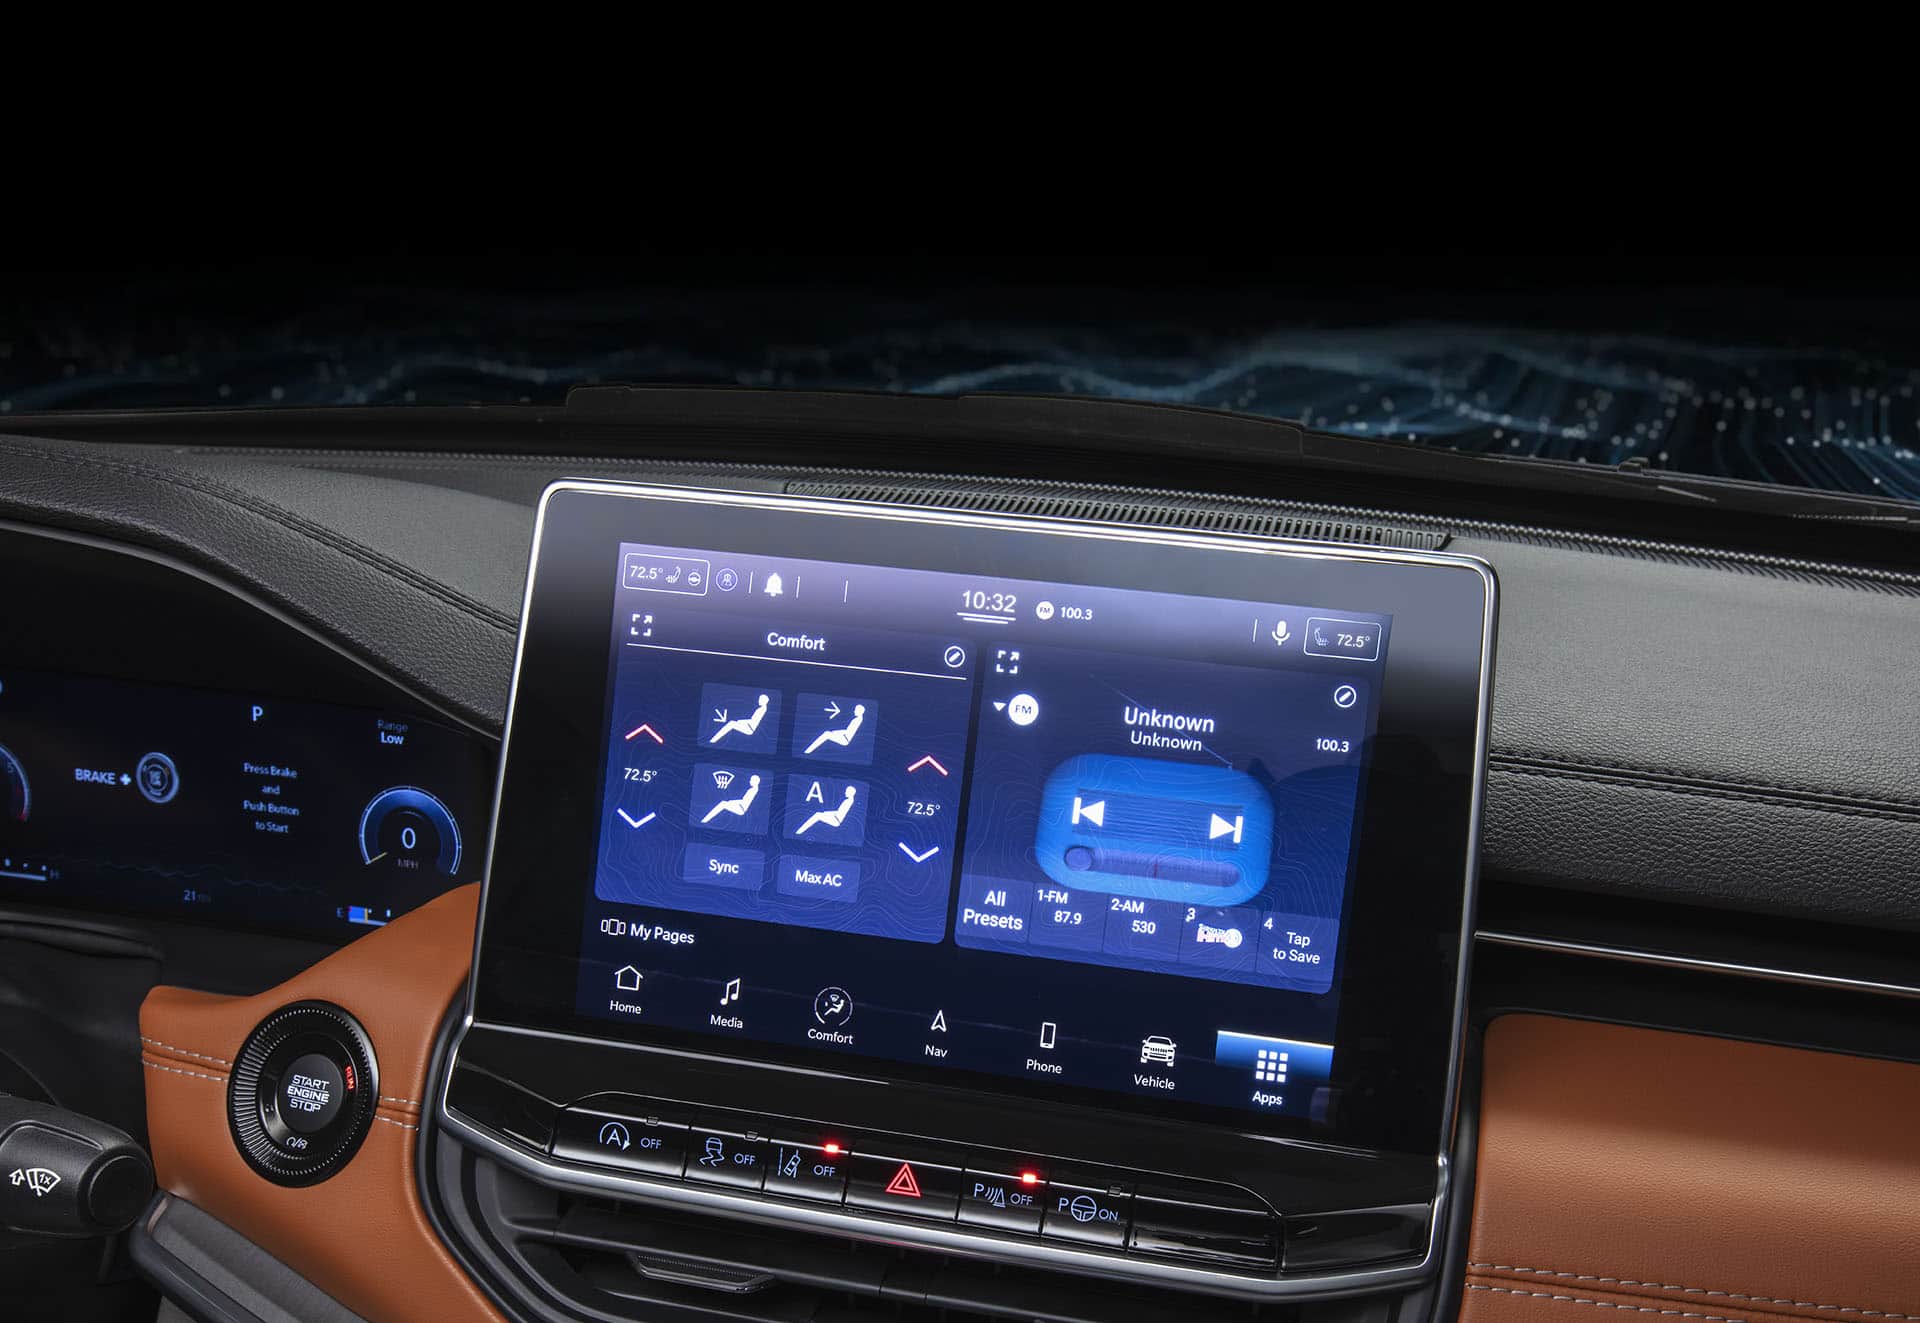 The Uconnect touchscreen in the 2023 Jeep Compass displaying a split screen of climate controls and radio station data.